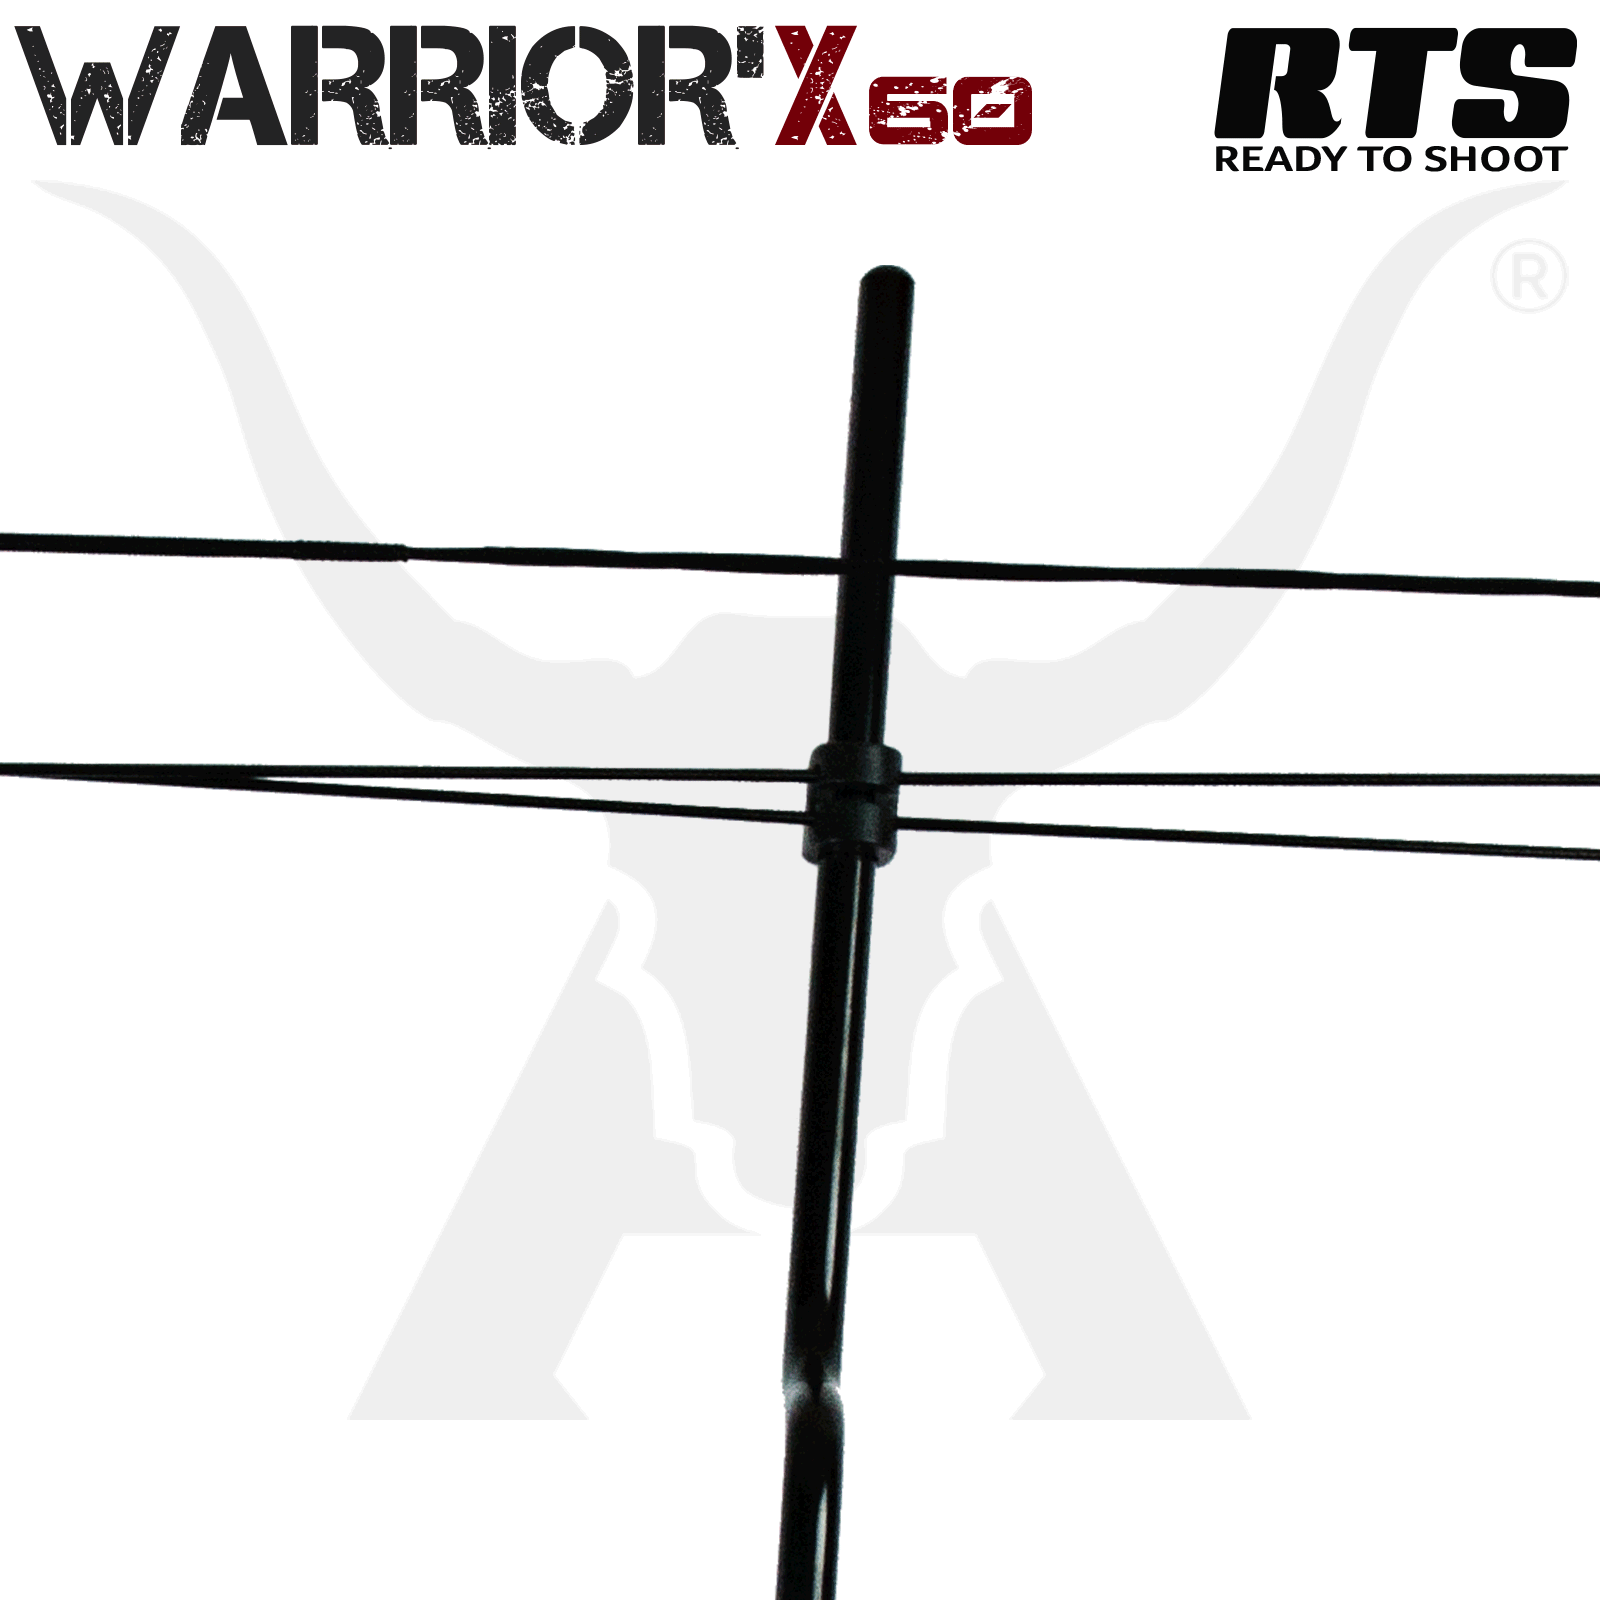 RTS WARRIOR'X 5-55 LBS Compound Bow Kit Archery Bow Hunting